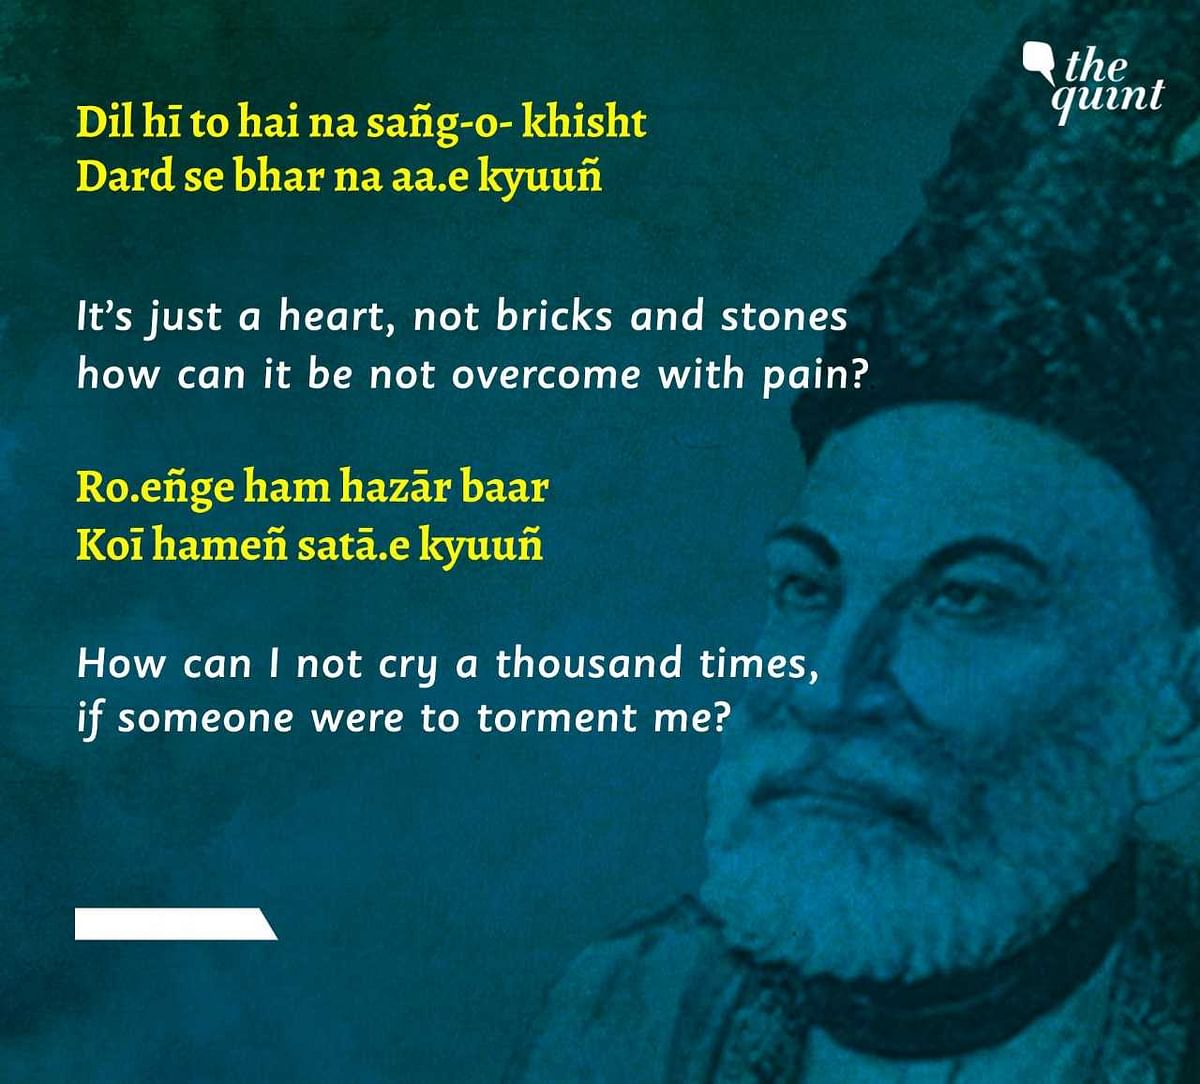 Thanks Ghalib for listening to me.